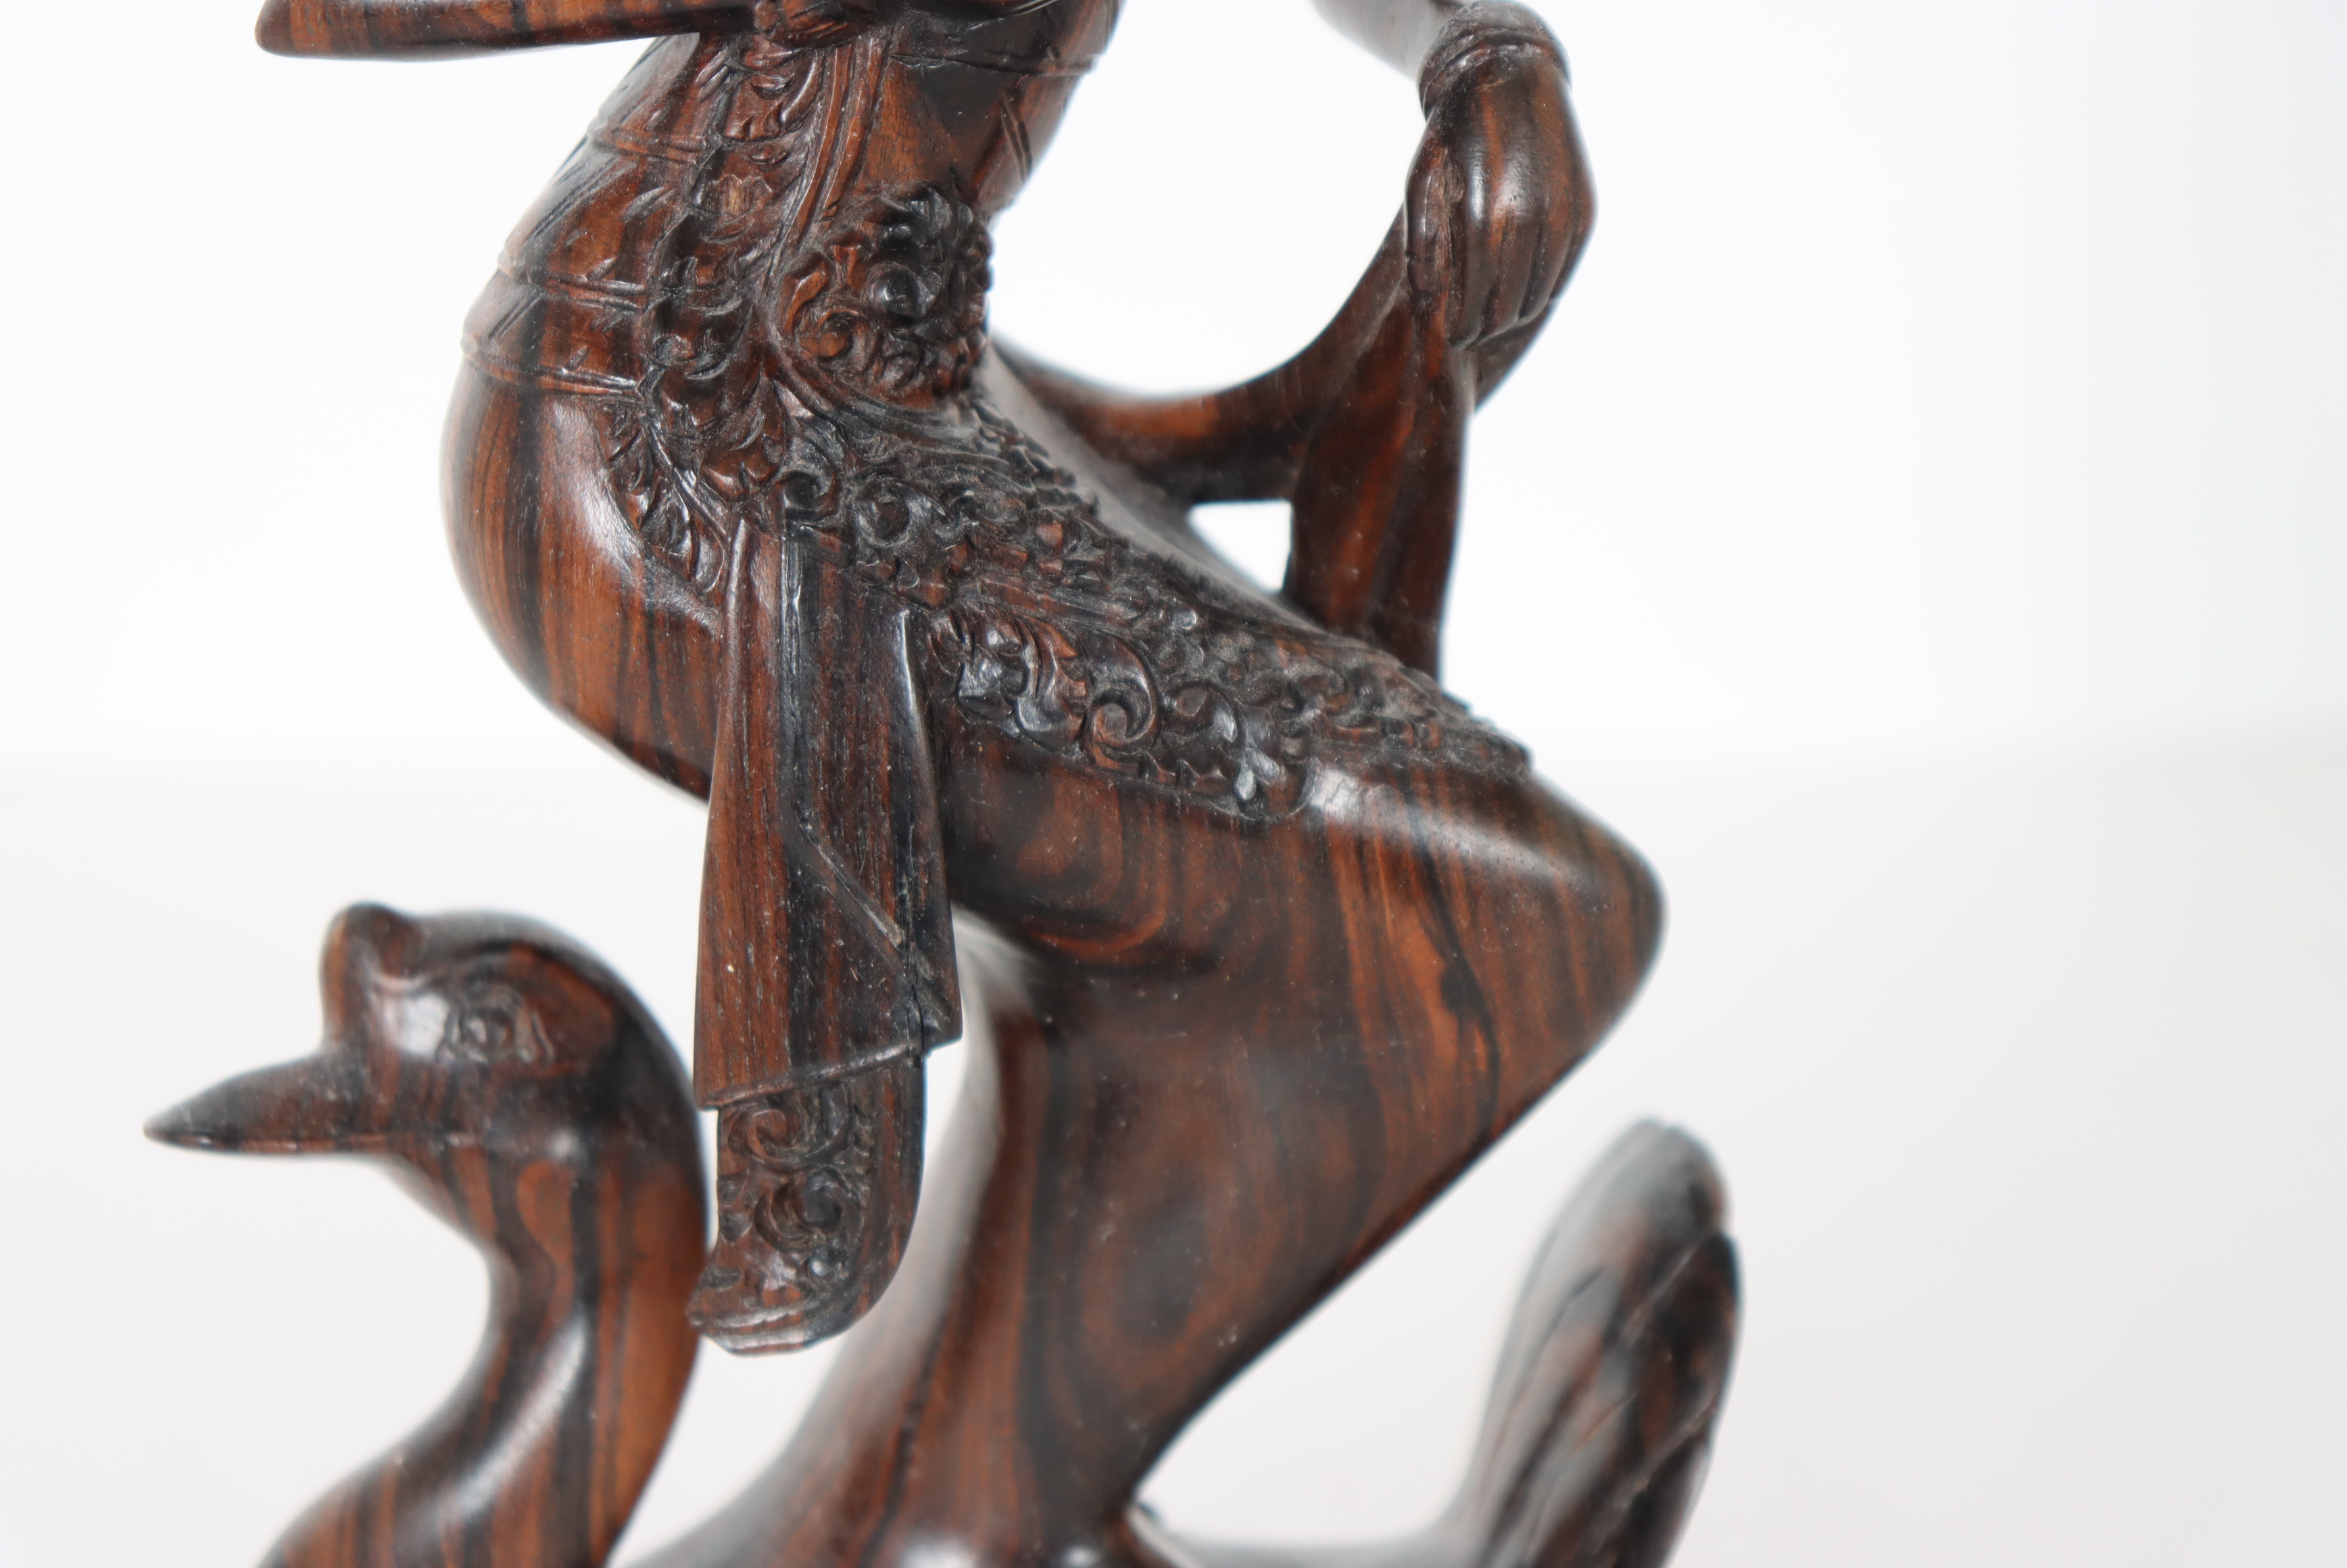 Balinese Wood Carving of Goddess w Swan - Image 3 of 4